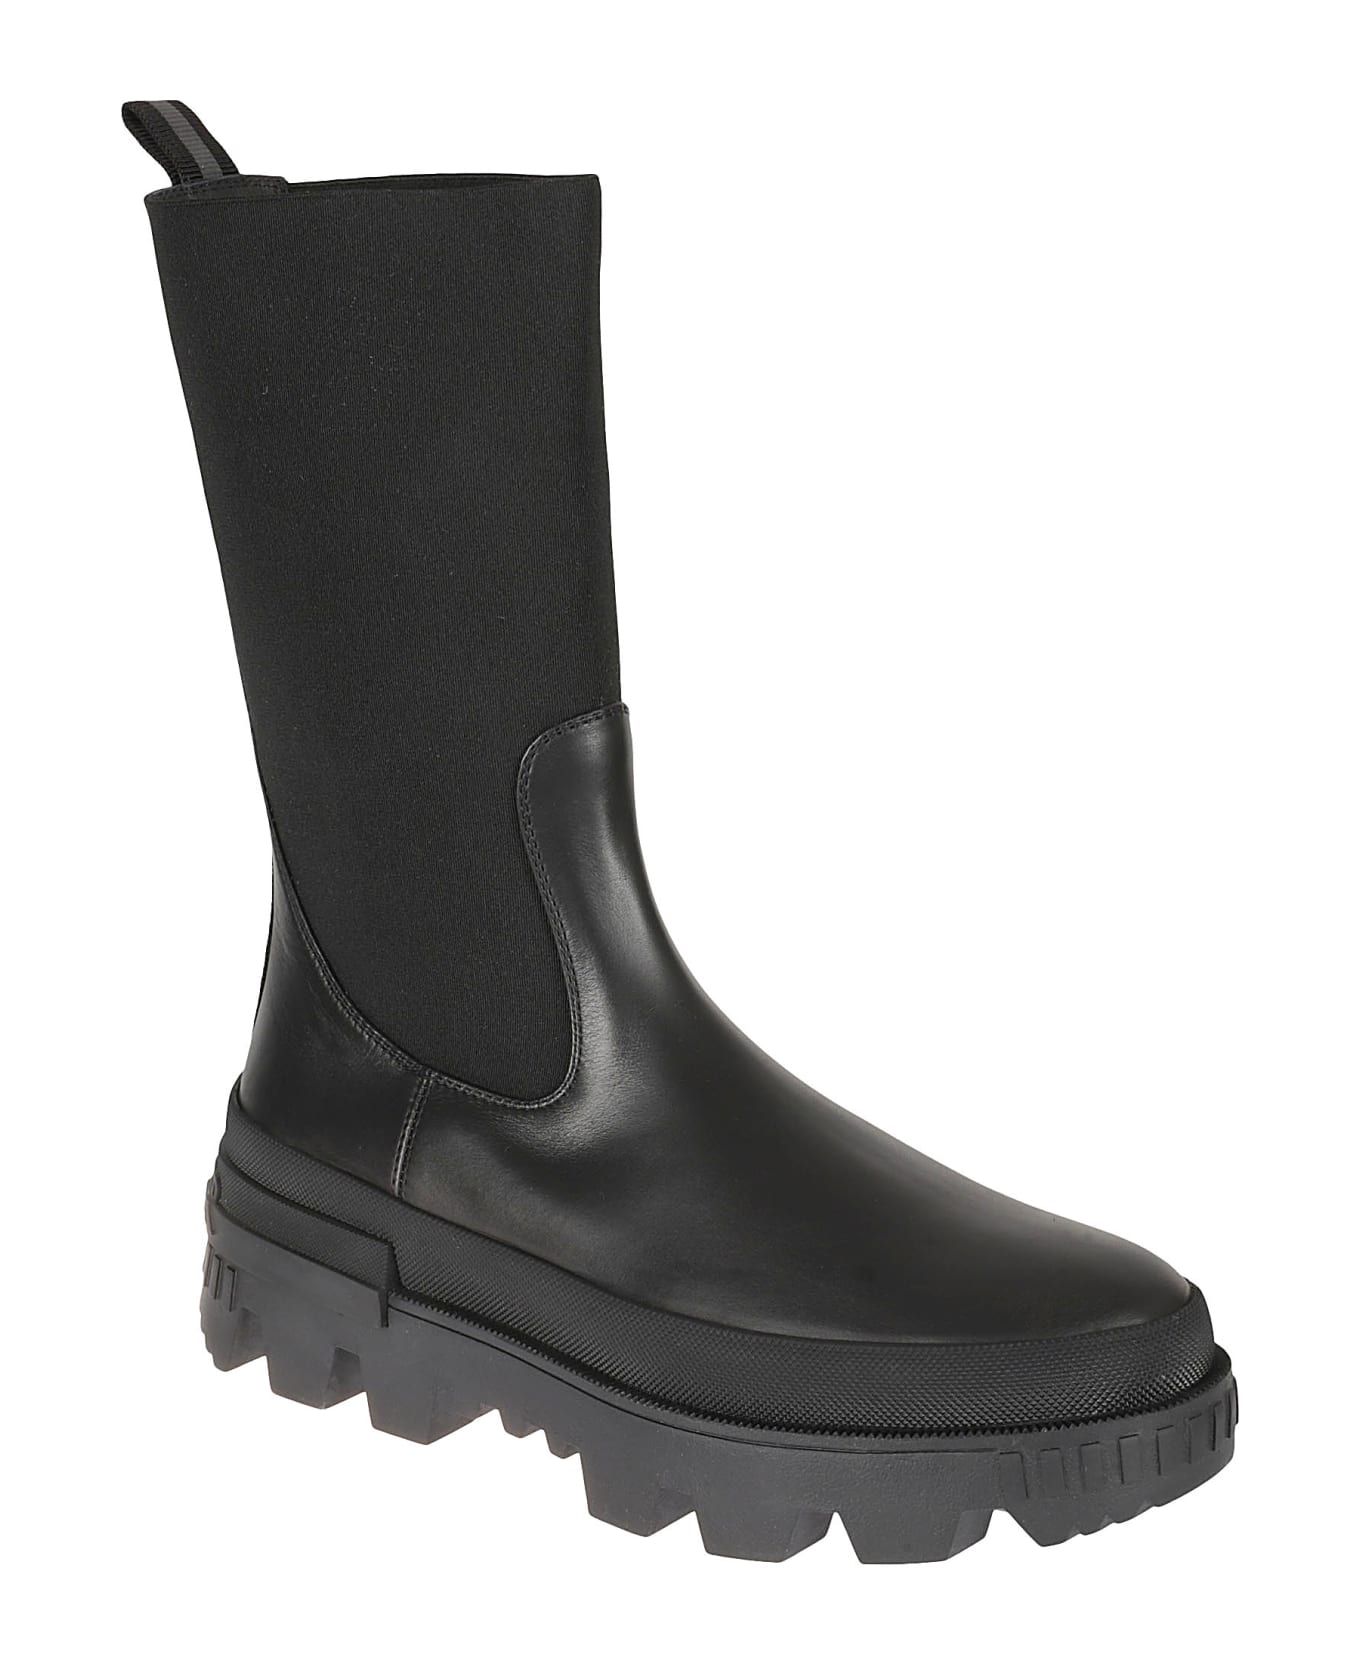 Moncler Neue Chelsea High Ankle Boots - Nero